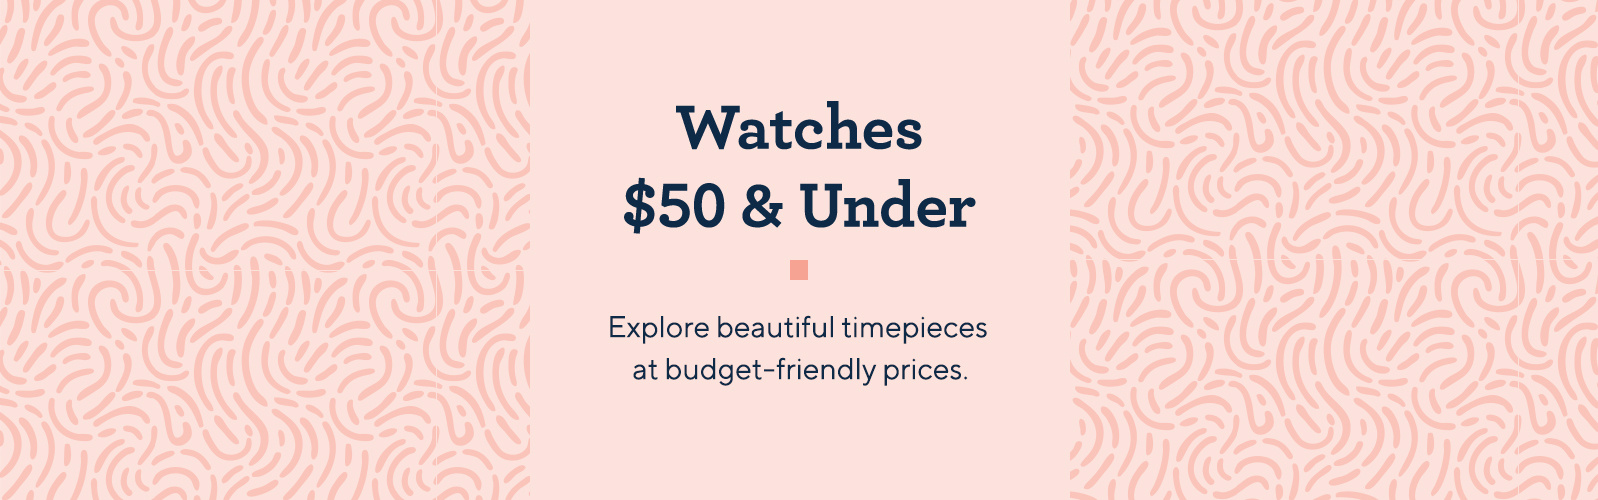 Watches $50 & Under.  Explore beautiful timepieces at budget-friendly prices.